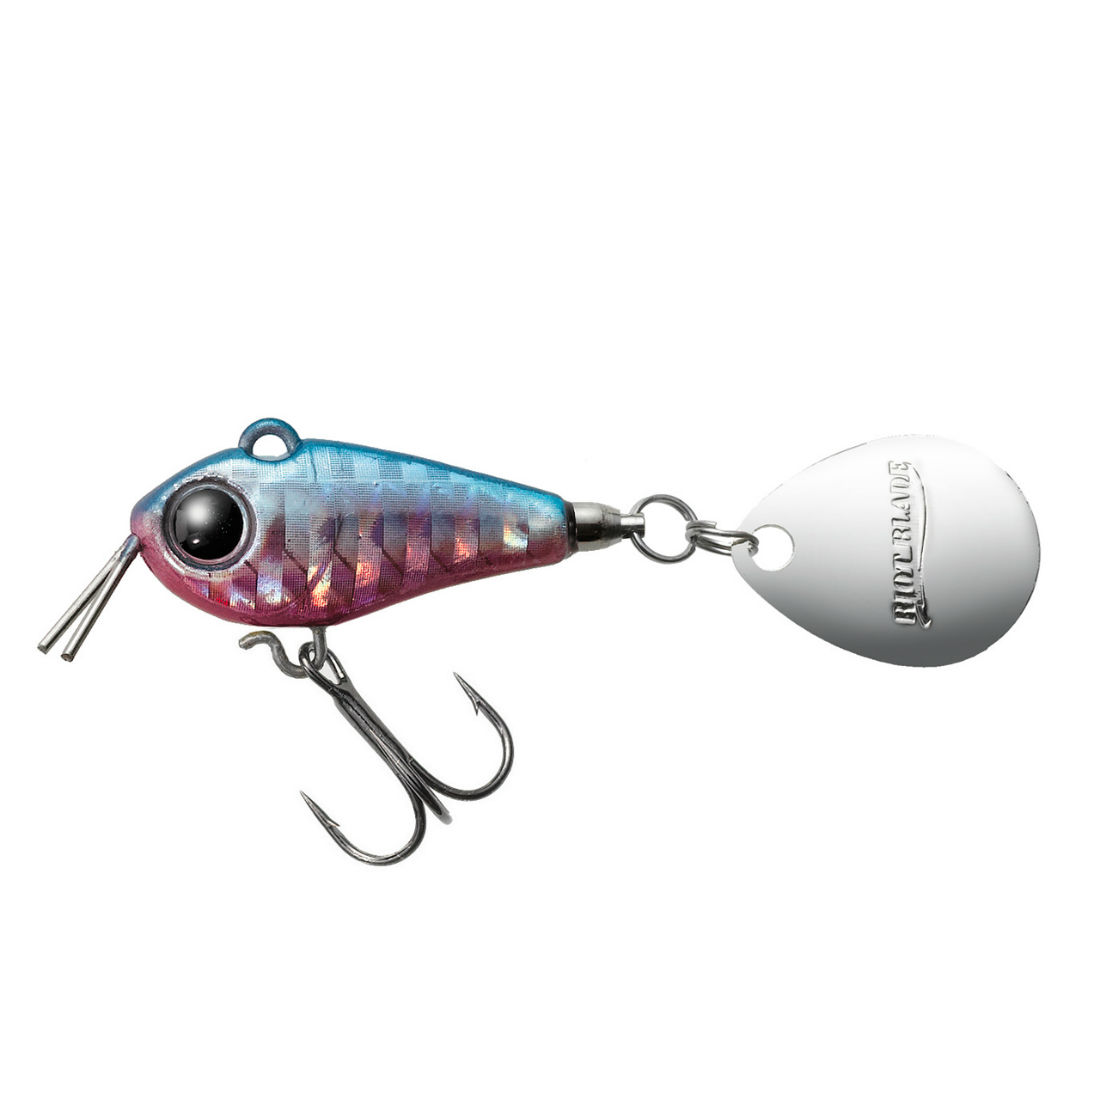 SPINNERTAIL TIEMCO RIOT BLADE S 25mm 9gr 09 Holo Blue Pink